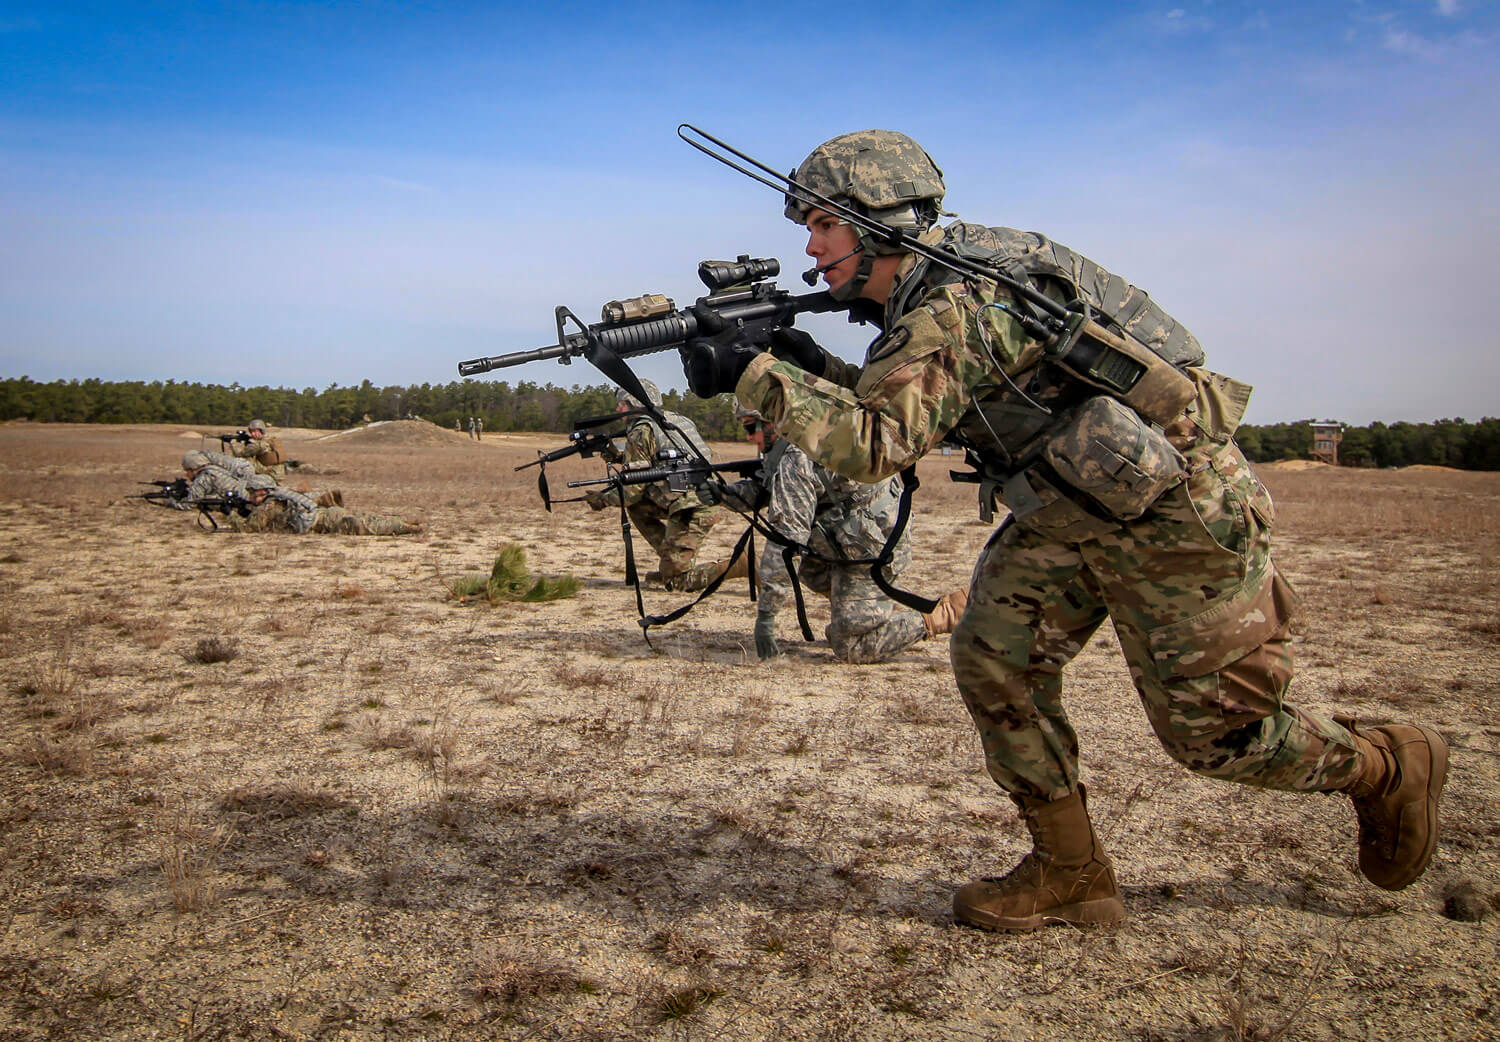 New Jersey Army National Guard Soldiers from Charlie Company, 1st Battalion, 114th Infantry (Air Assault), bound towards a target during live-fire battle drills on Joint Base McGuire-Dix-Lakehurst, N.J., April 9, 2018. New Jersey Air National Guard photo by MSgt Matt Hecht